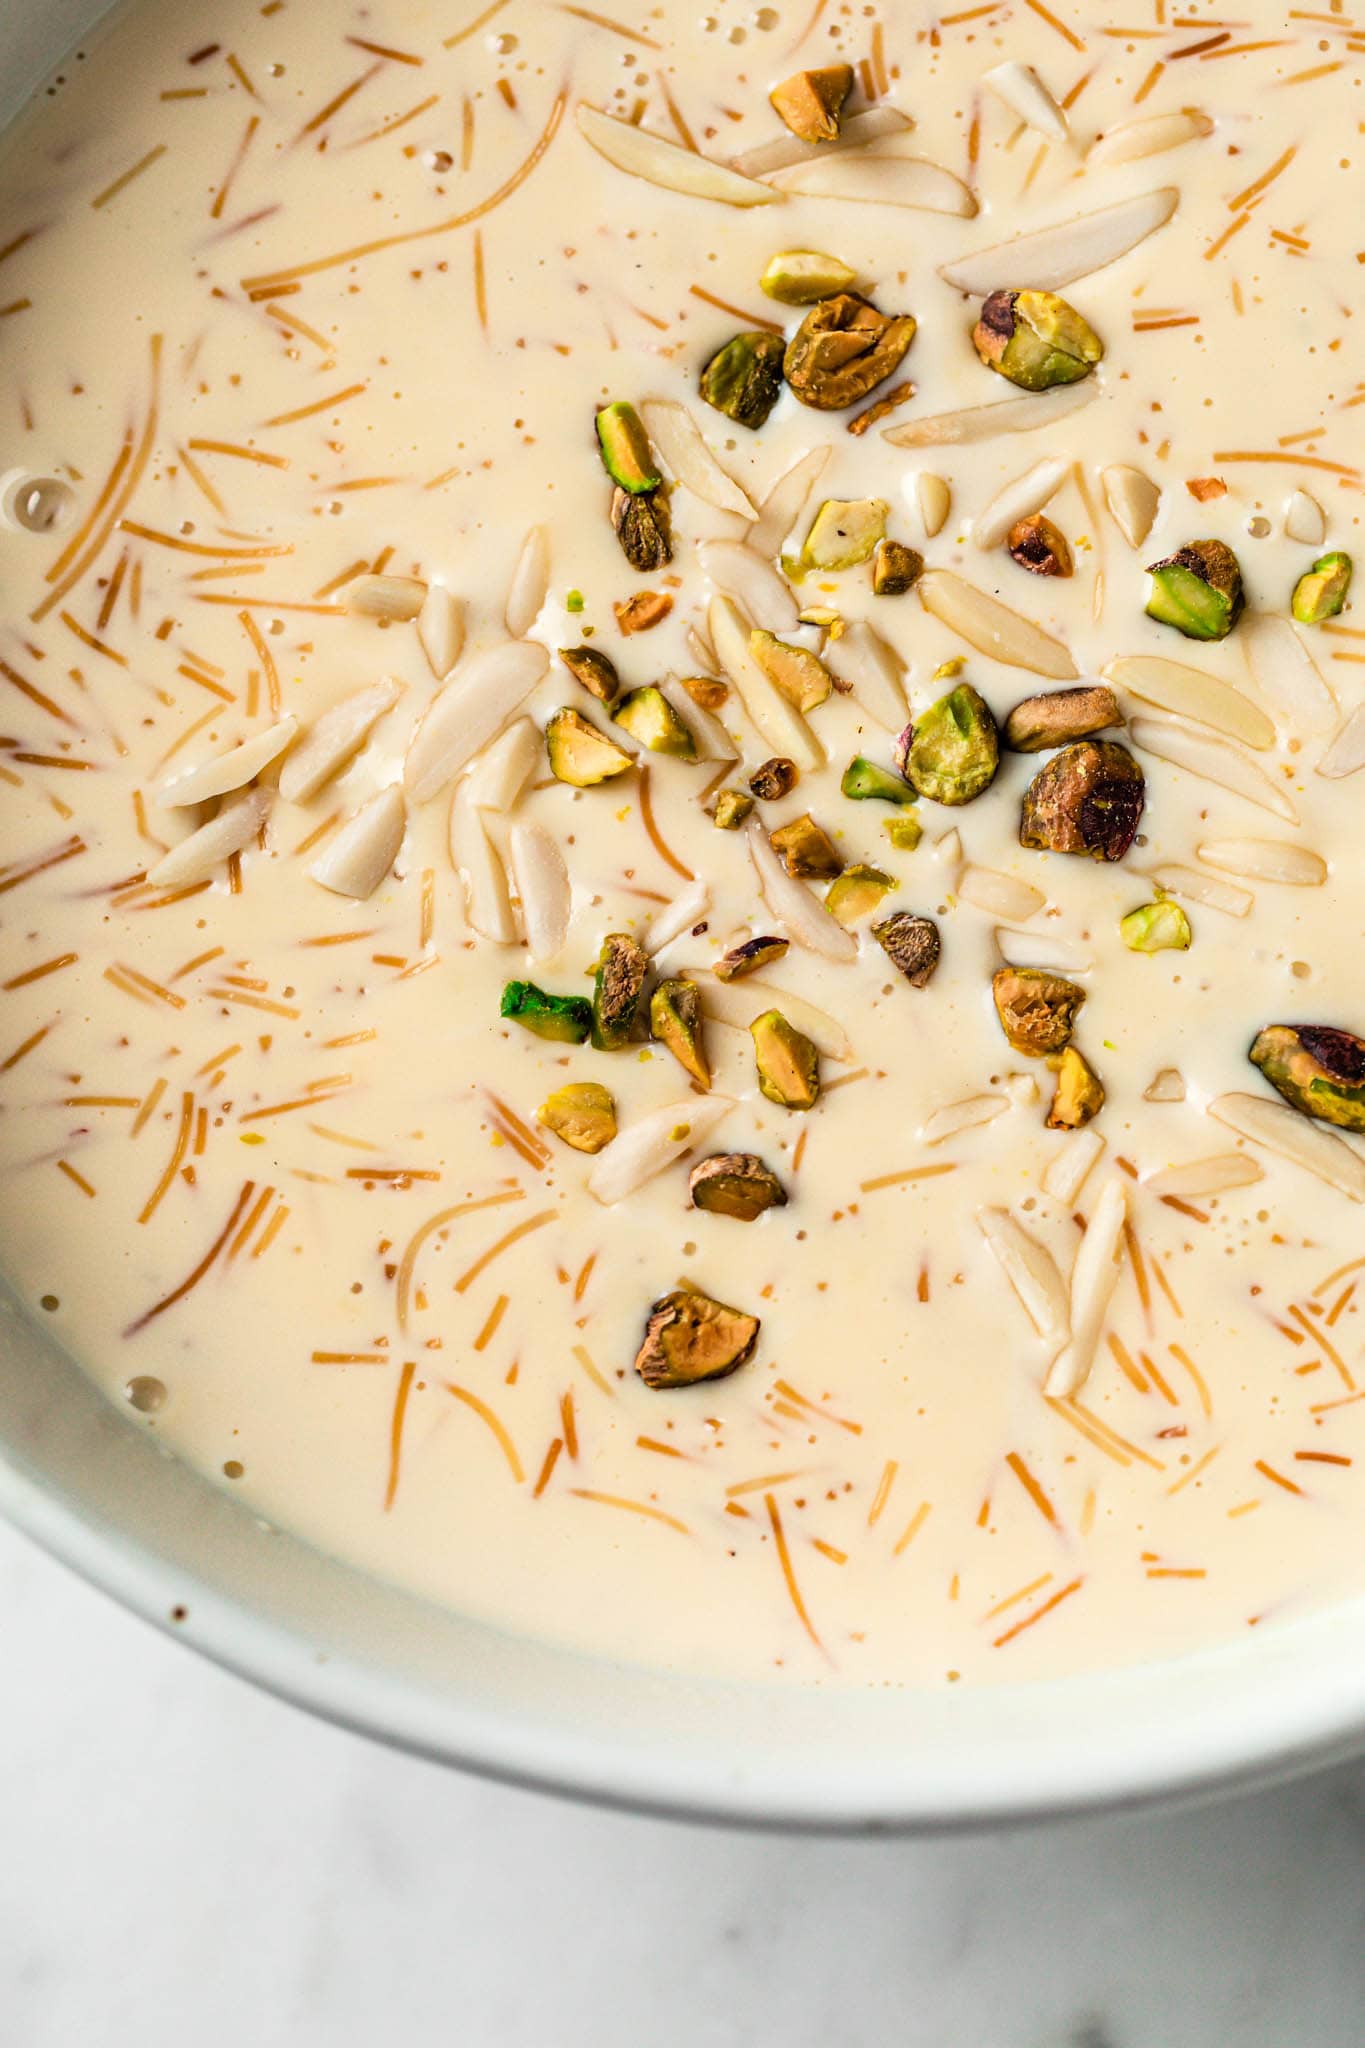 A close up of creamy seviyan garnished with nuts